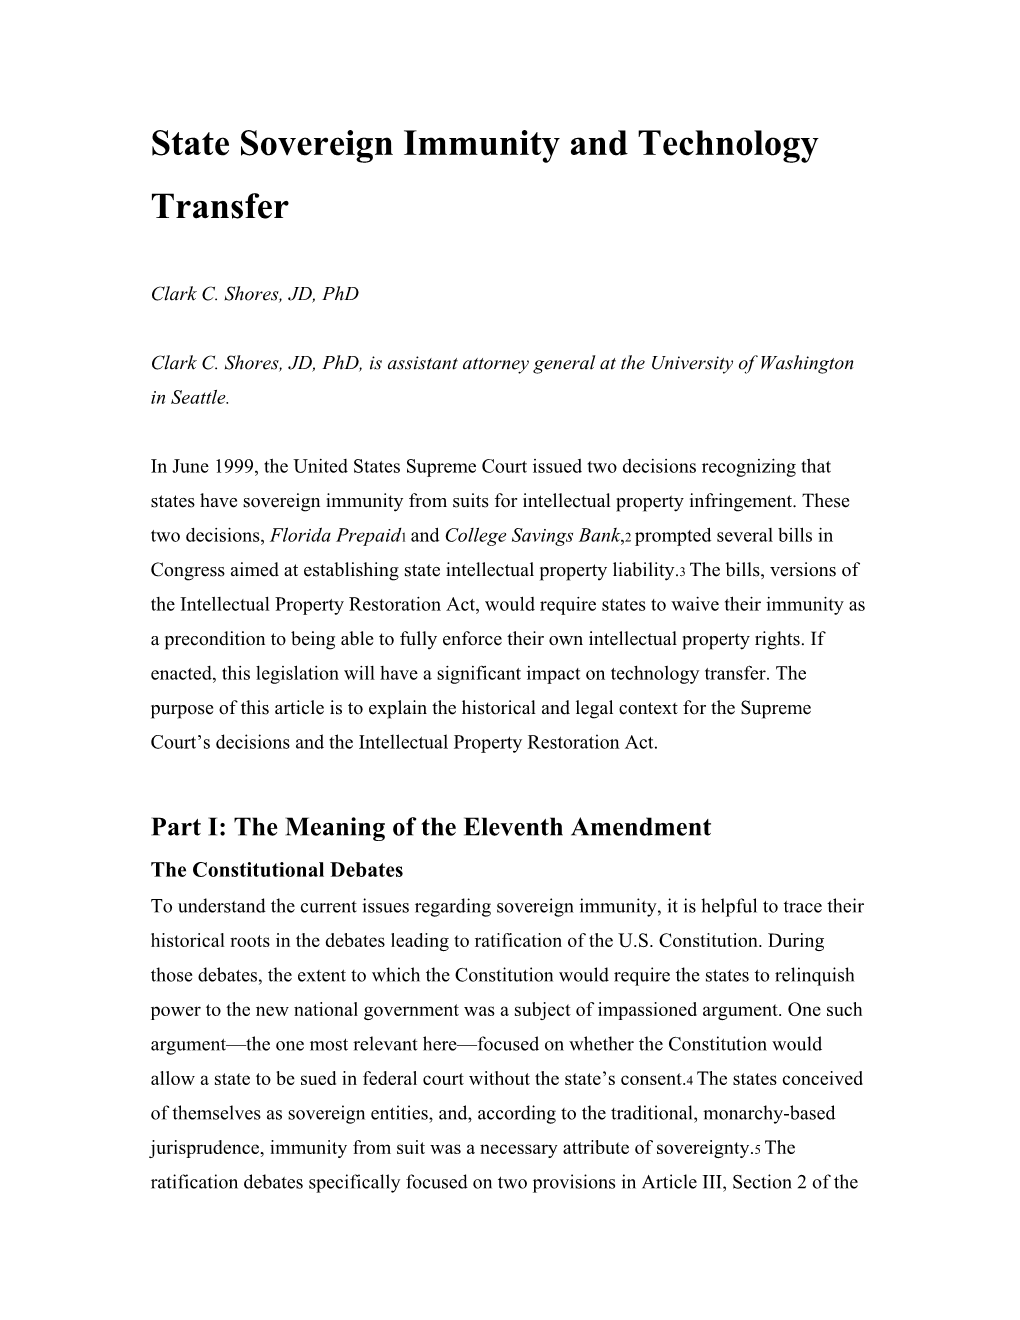 State Sovereign Immunity and Technology Transfer